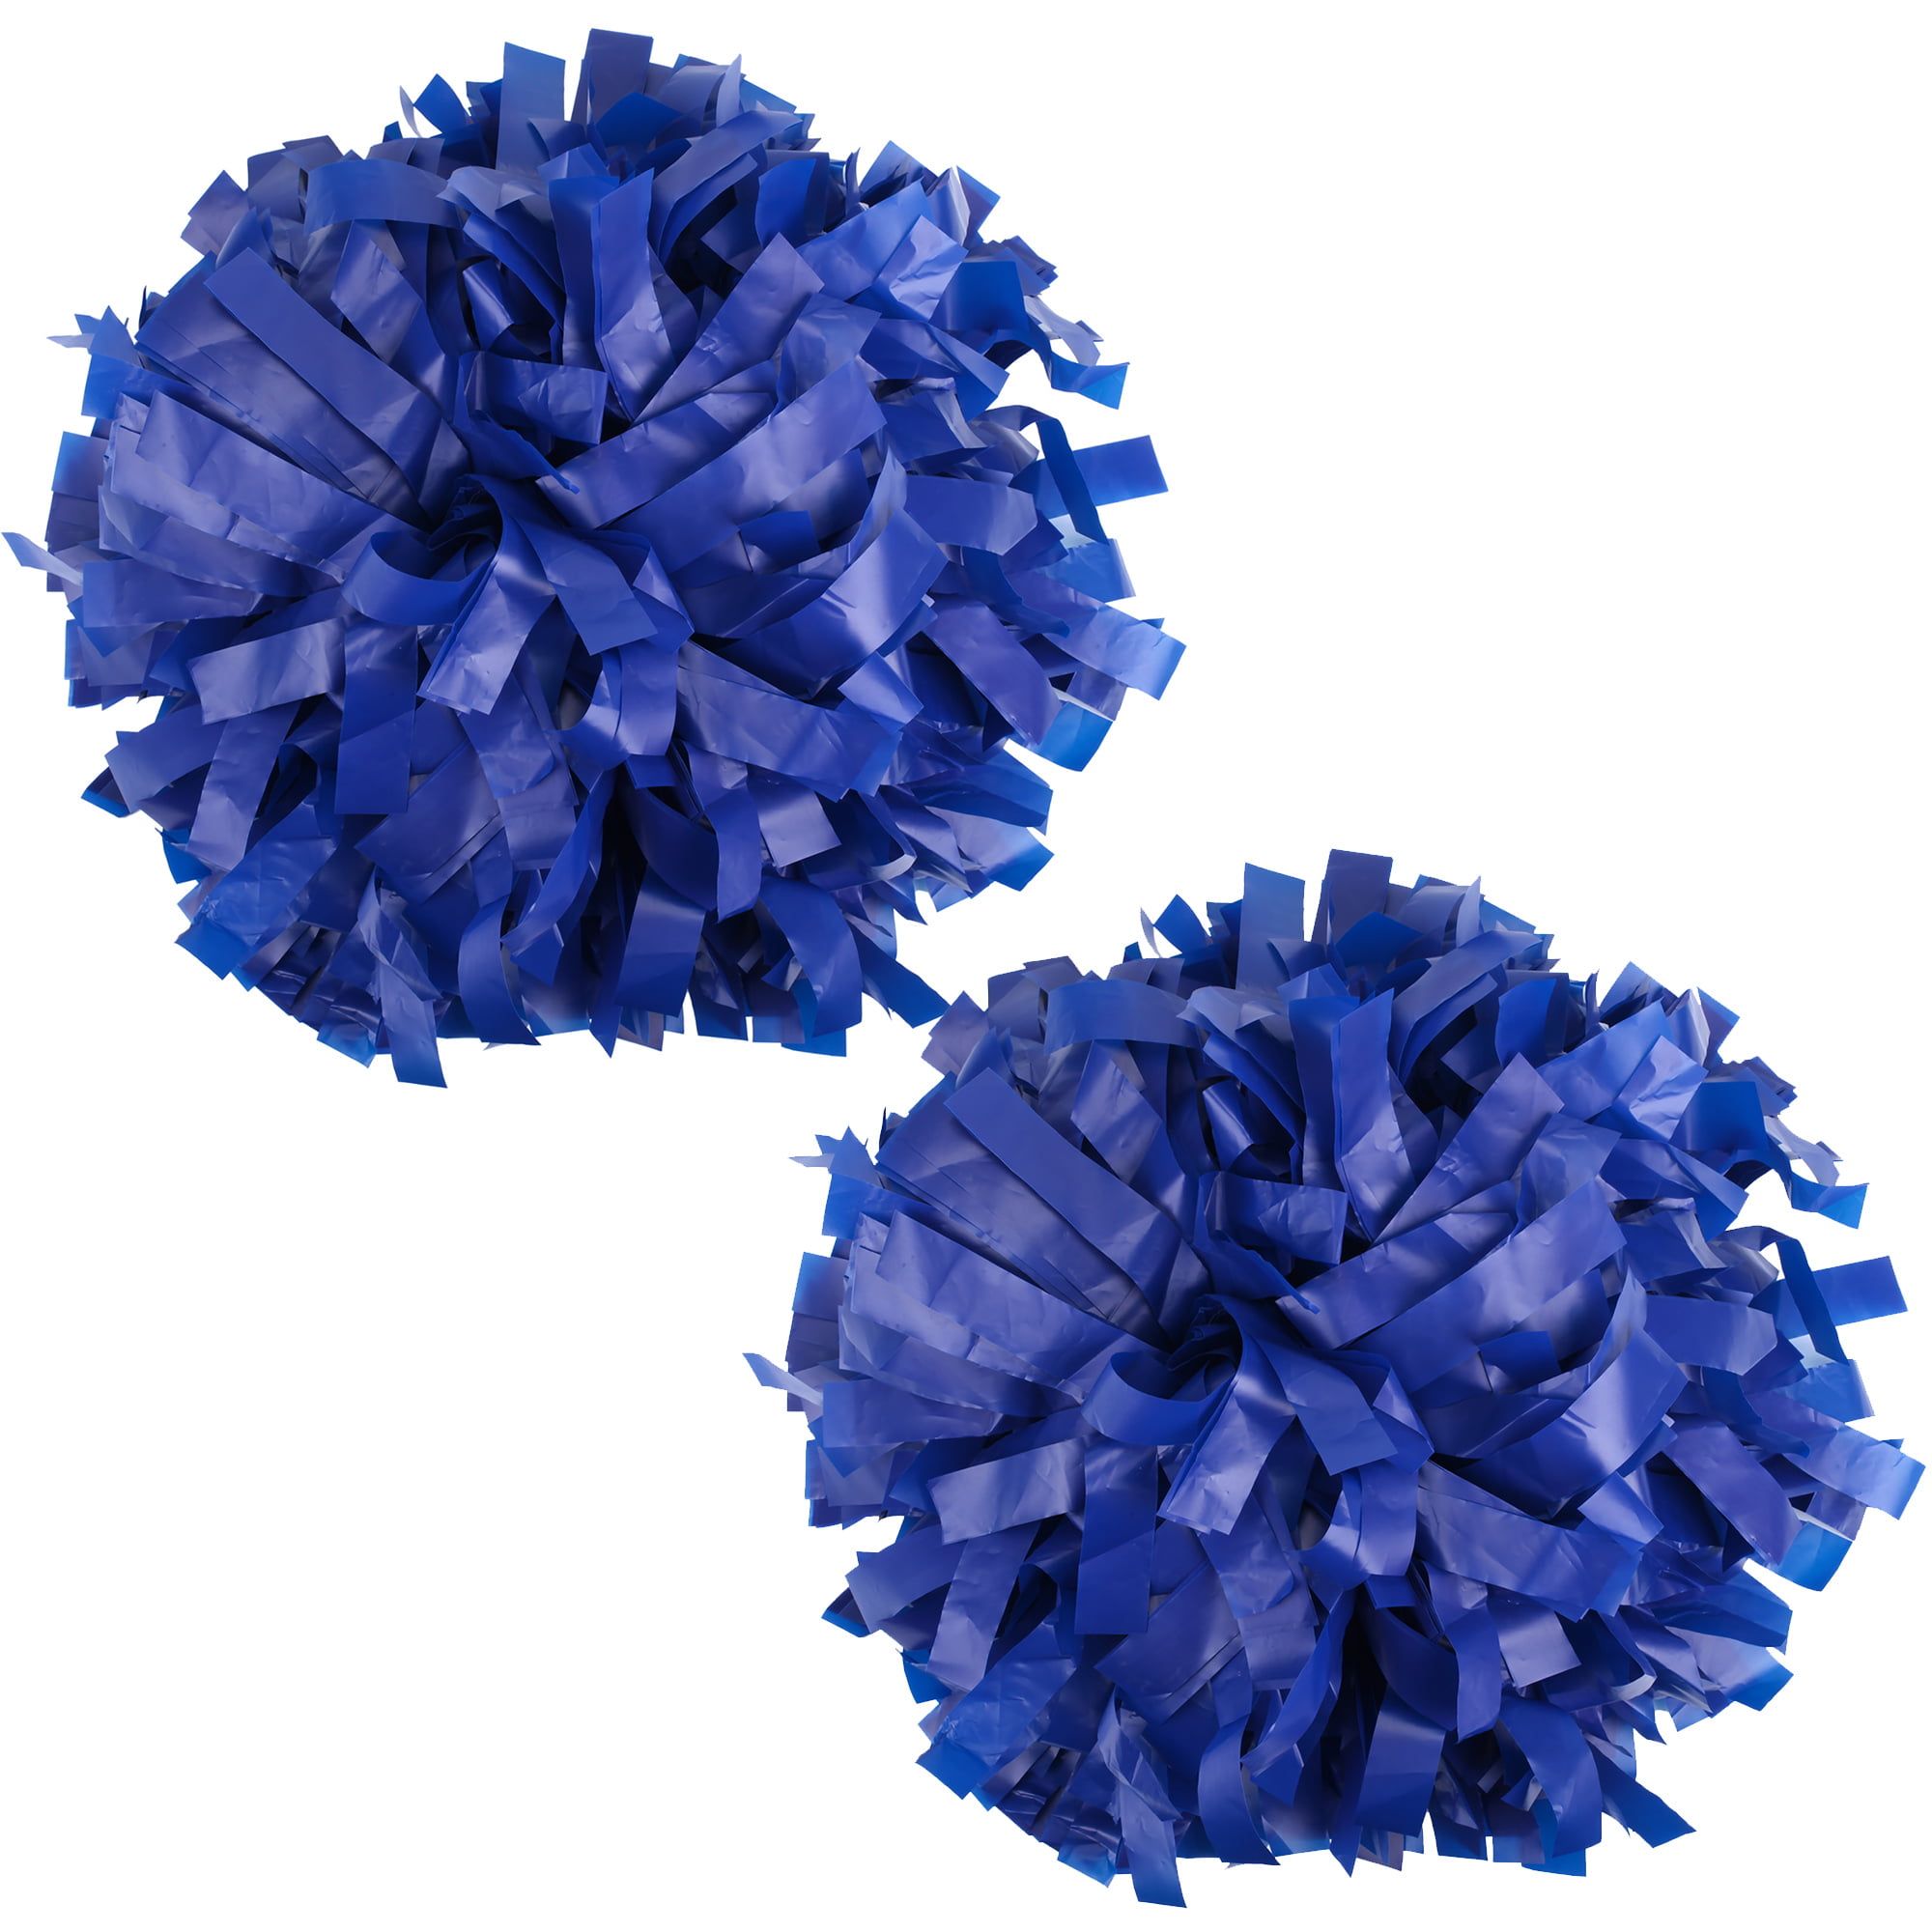 New Solid Yellow or Aqua Blue Cheerleader Pom Poms Miami Dolphins Blue